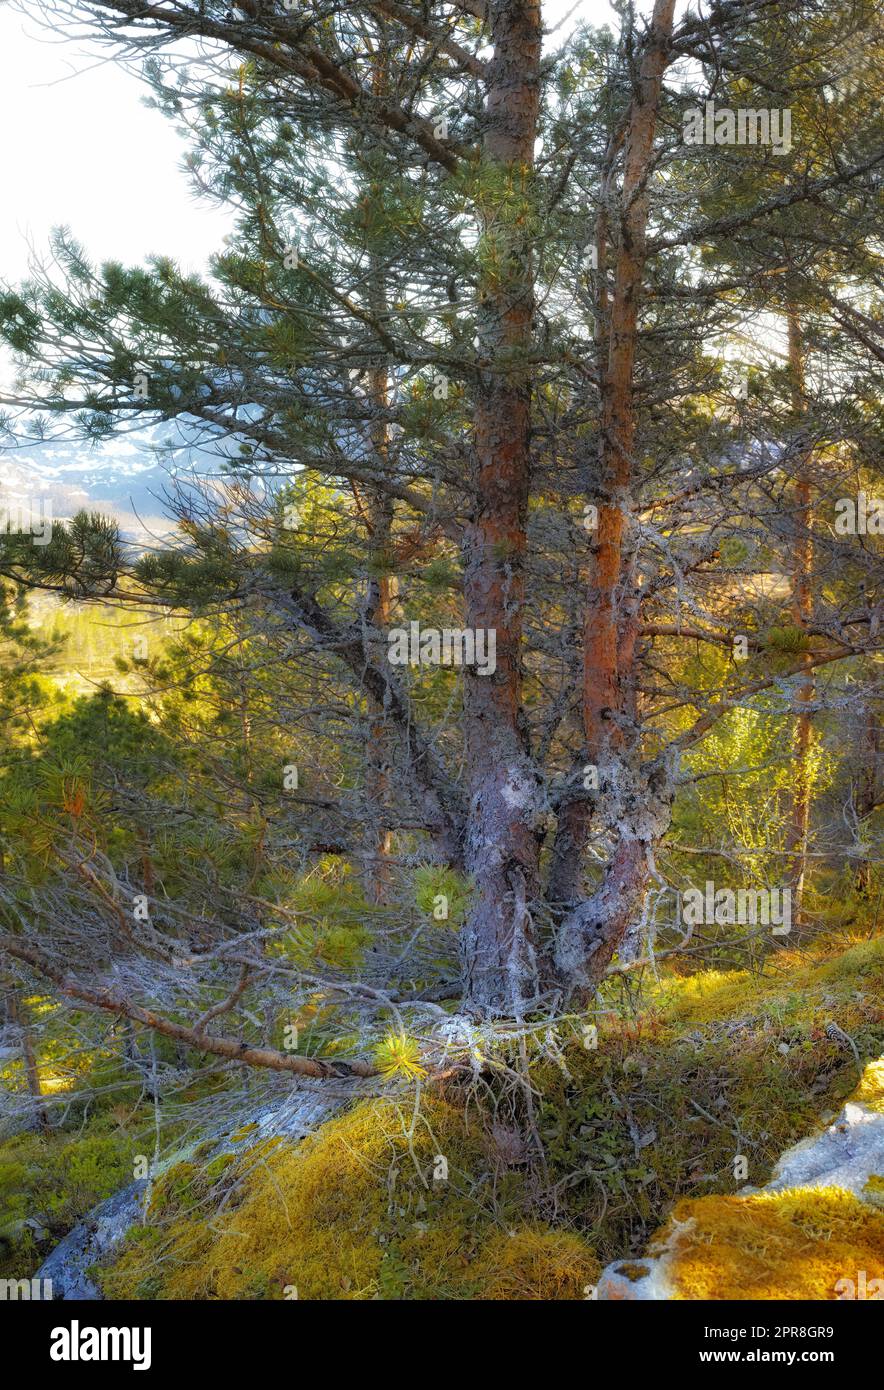 Lush rocky wilderness with wild trees and shrubs in Bodo, Nordland, Noway. Scenic natural landscape with wooden texture of old bark in a remote and peaceful forest or woodlands to travel and explore Stock Photo